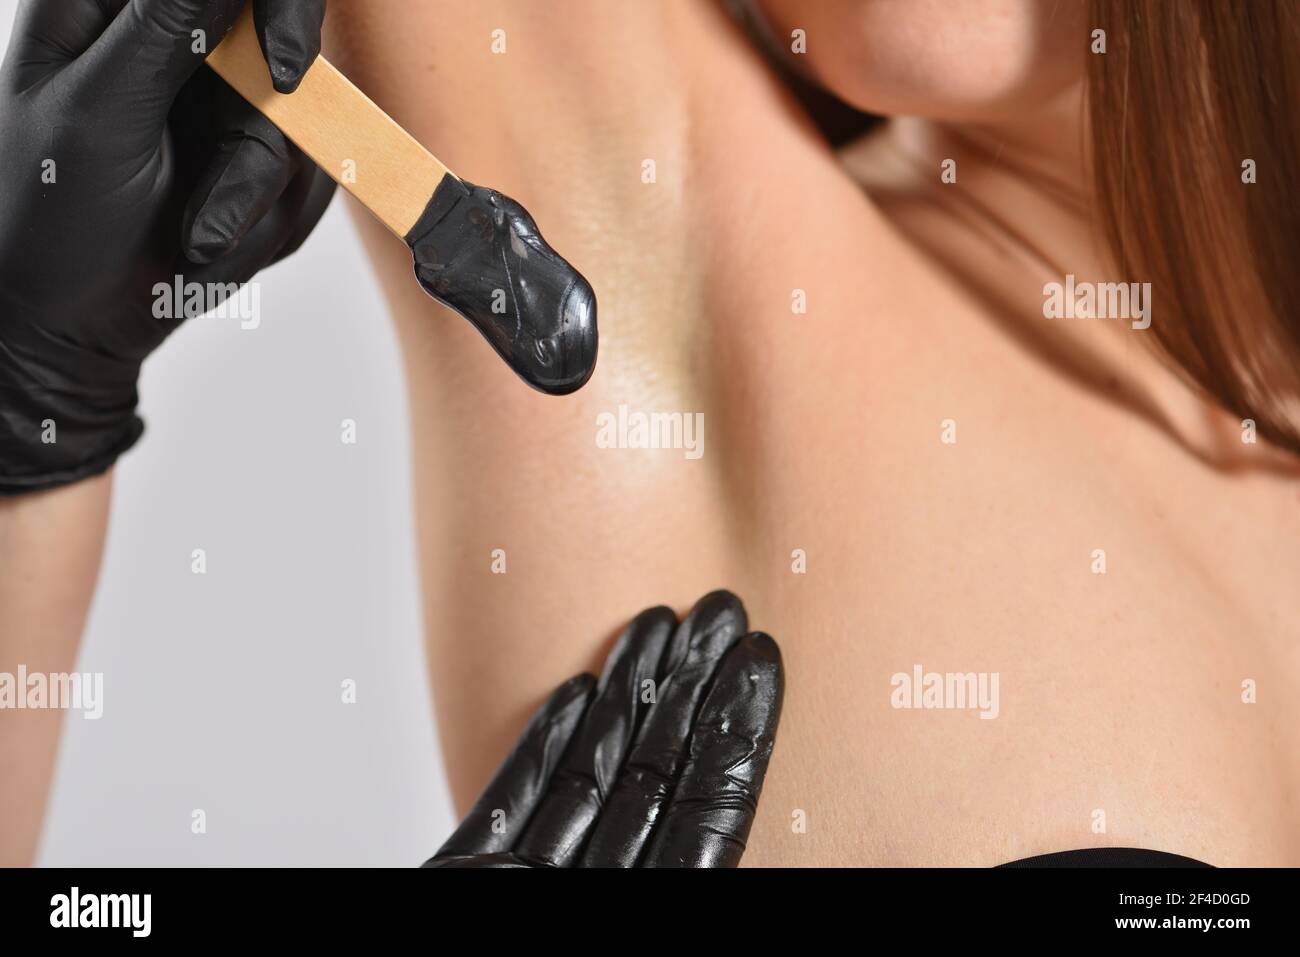 Stick with black wax for depilation on armpit background, body care and beauty concept Stock Photo